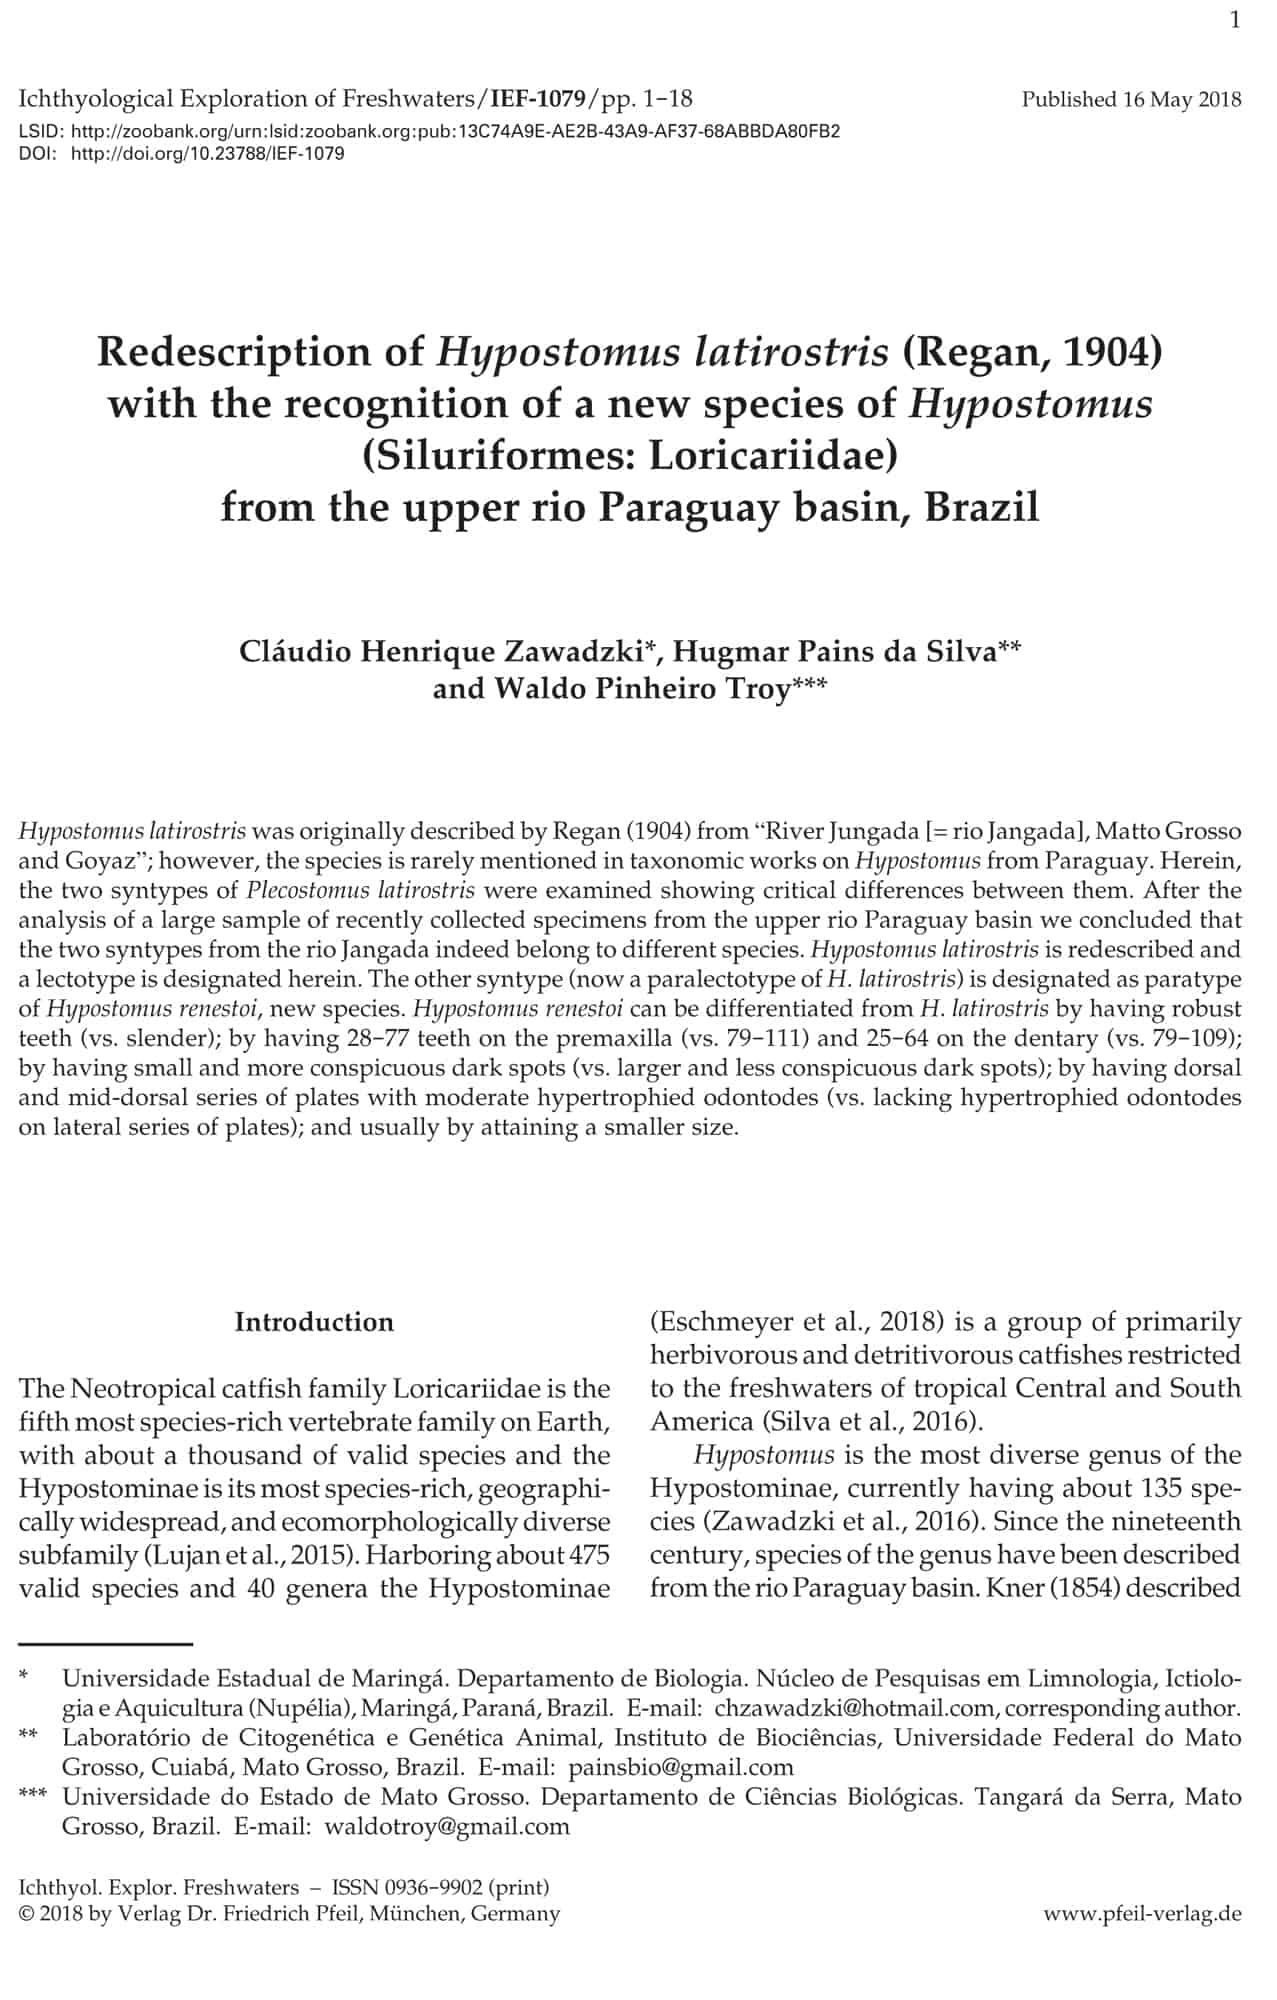 Redescription of Hypostomus latirostris (Regan, 1904) with the recognition of a new species of Hypostomus (Siluriformes: Loricariidae) from the upper rio Paraguay basin, Brazil